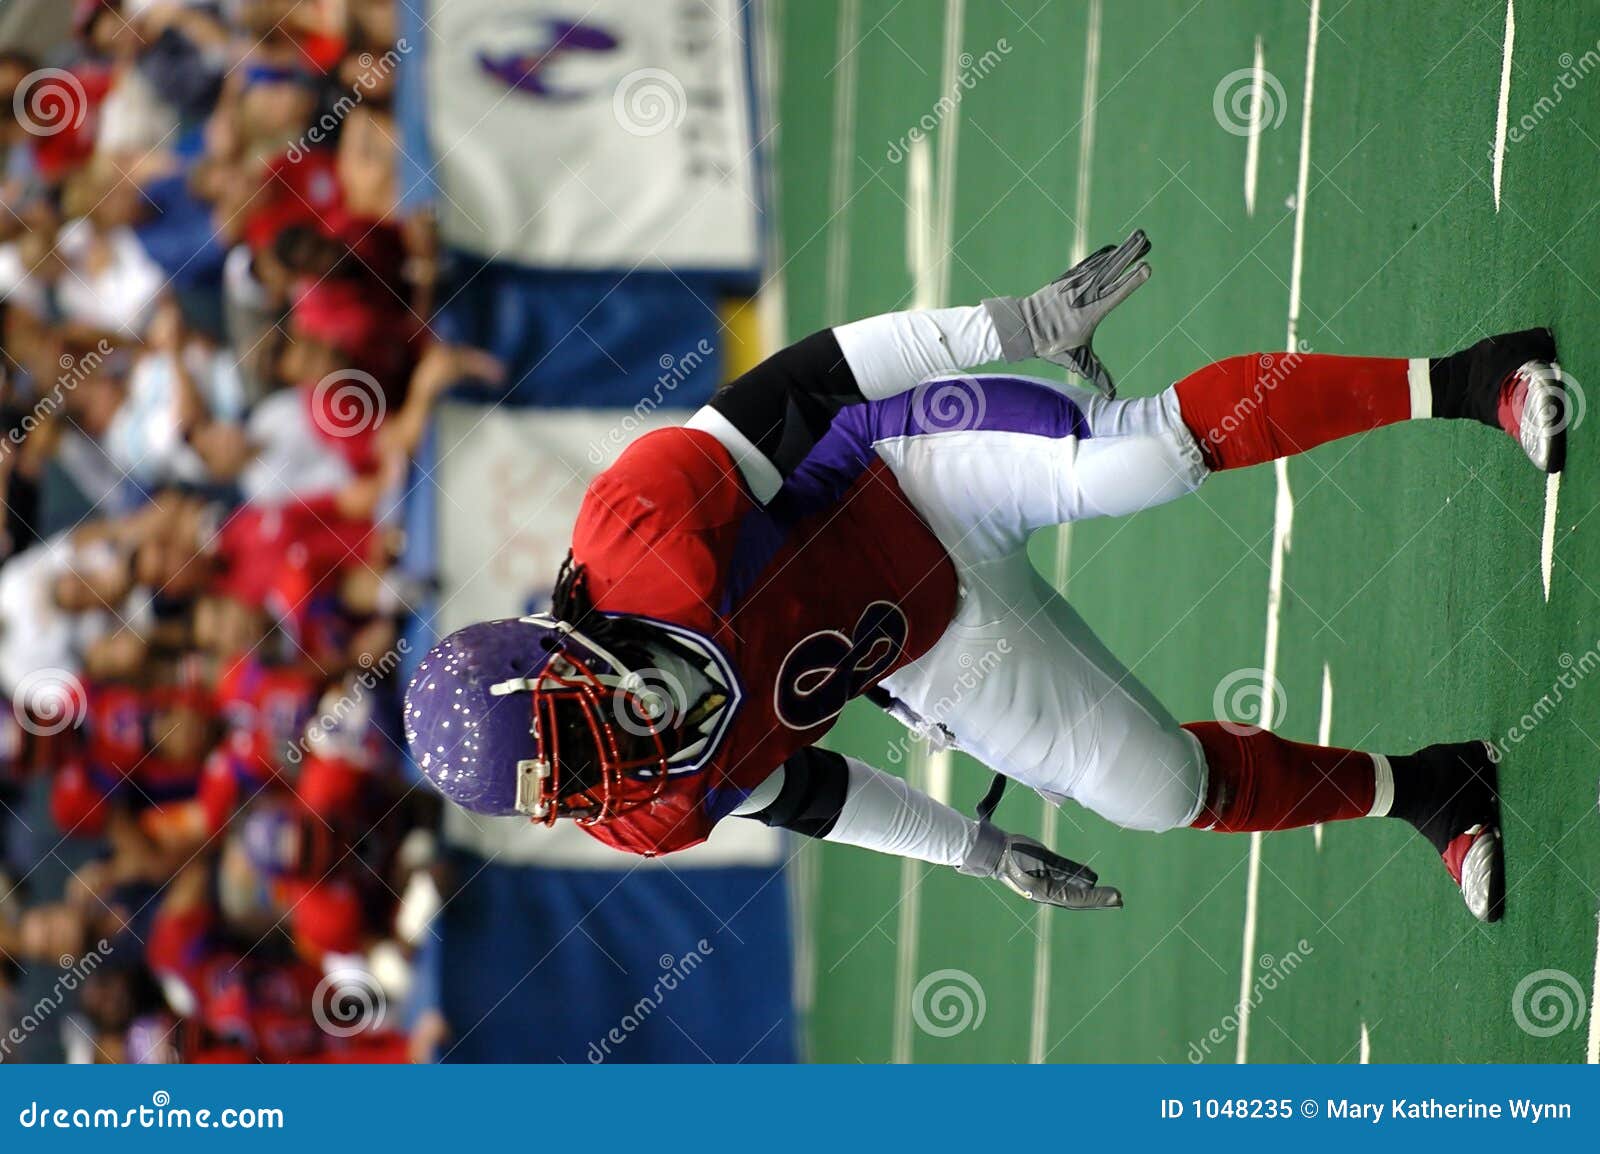 American football player stock image. Image of defense - 1048235